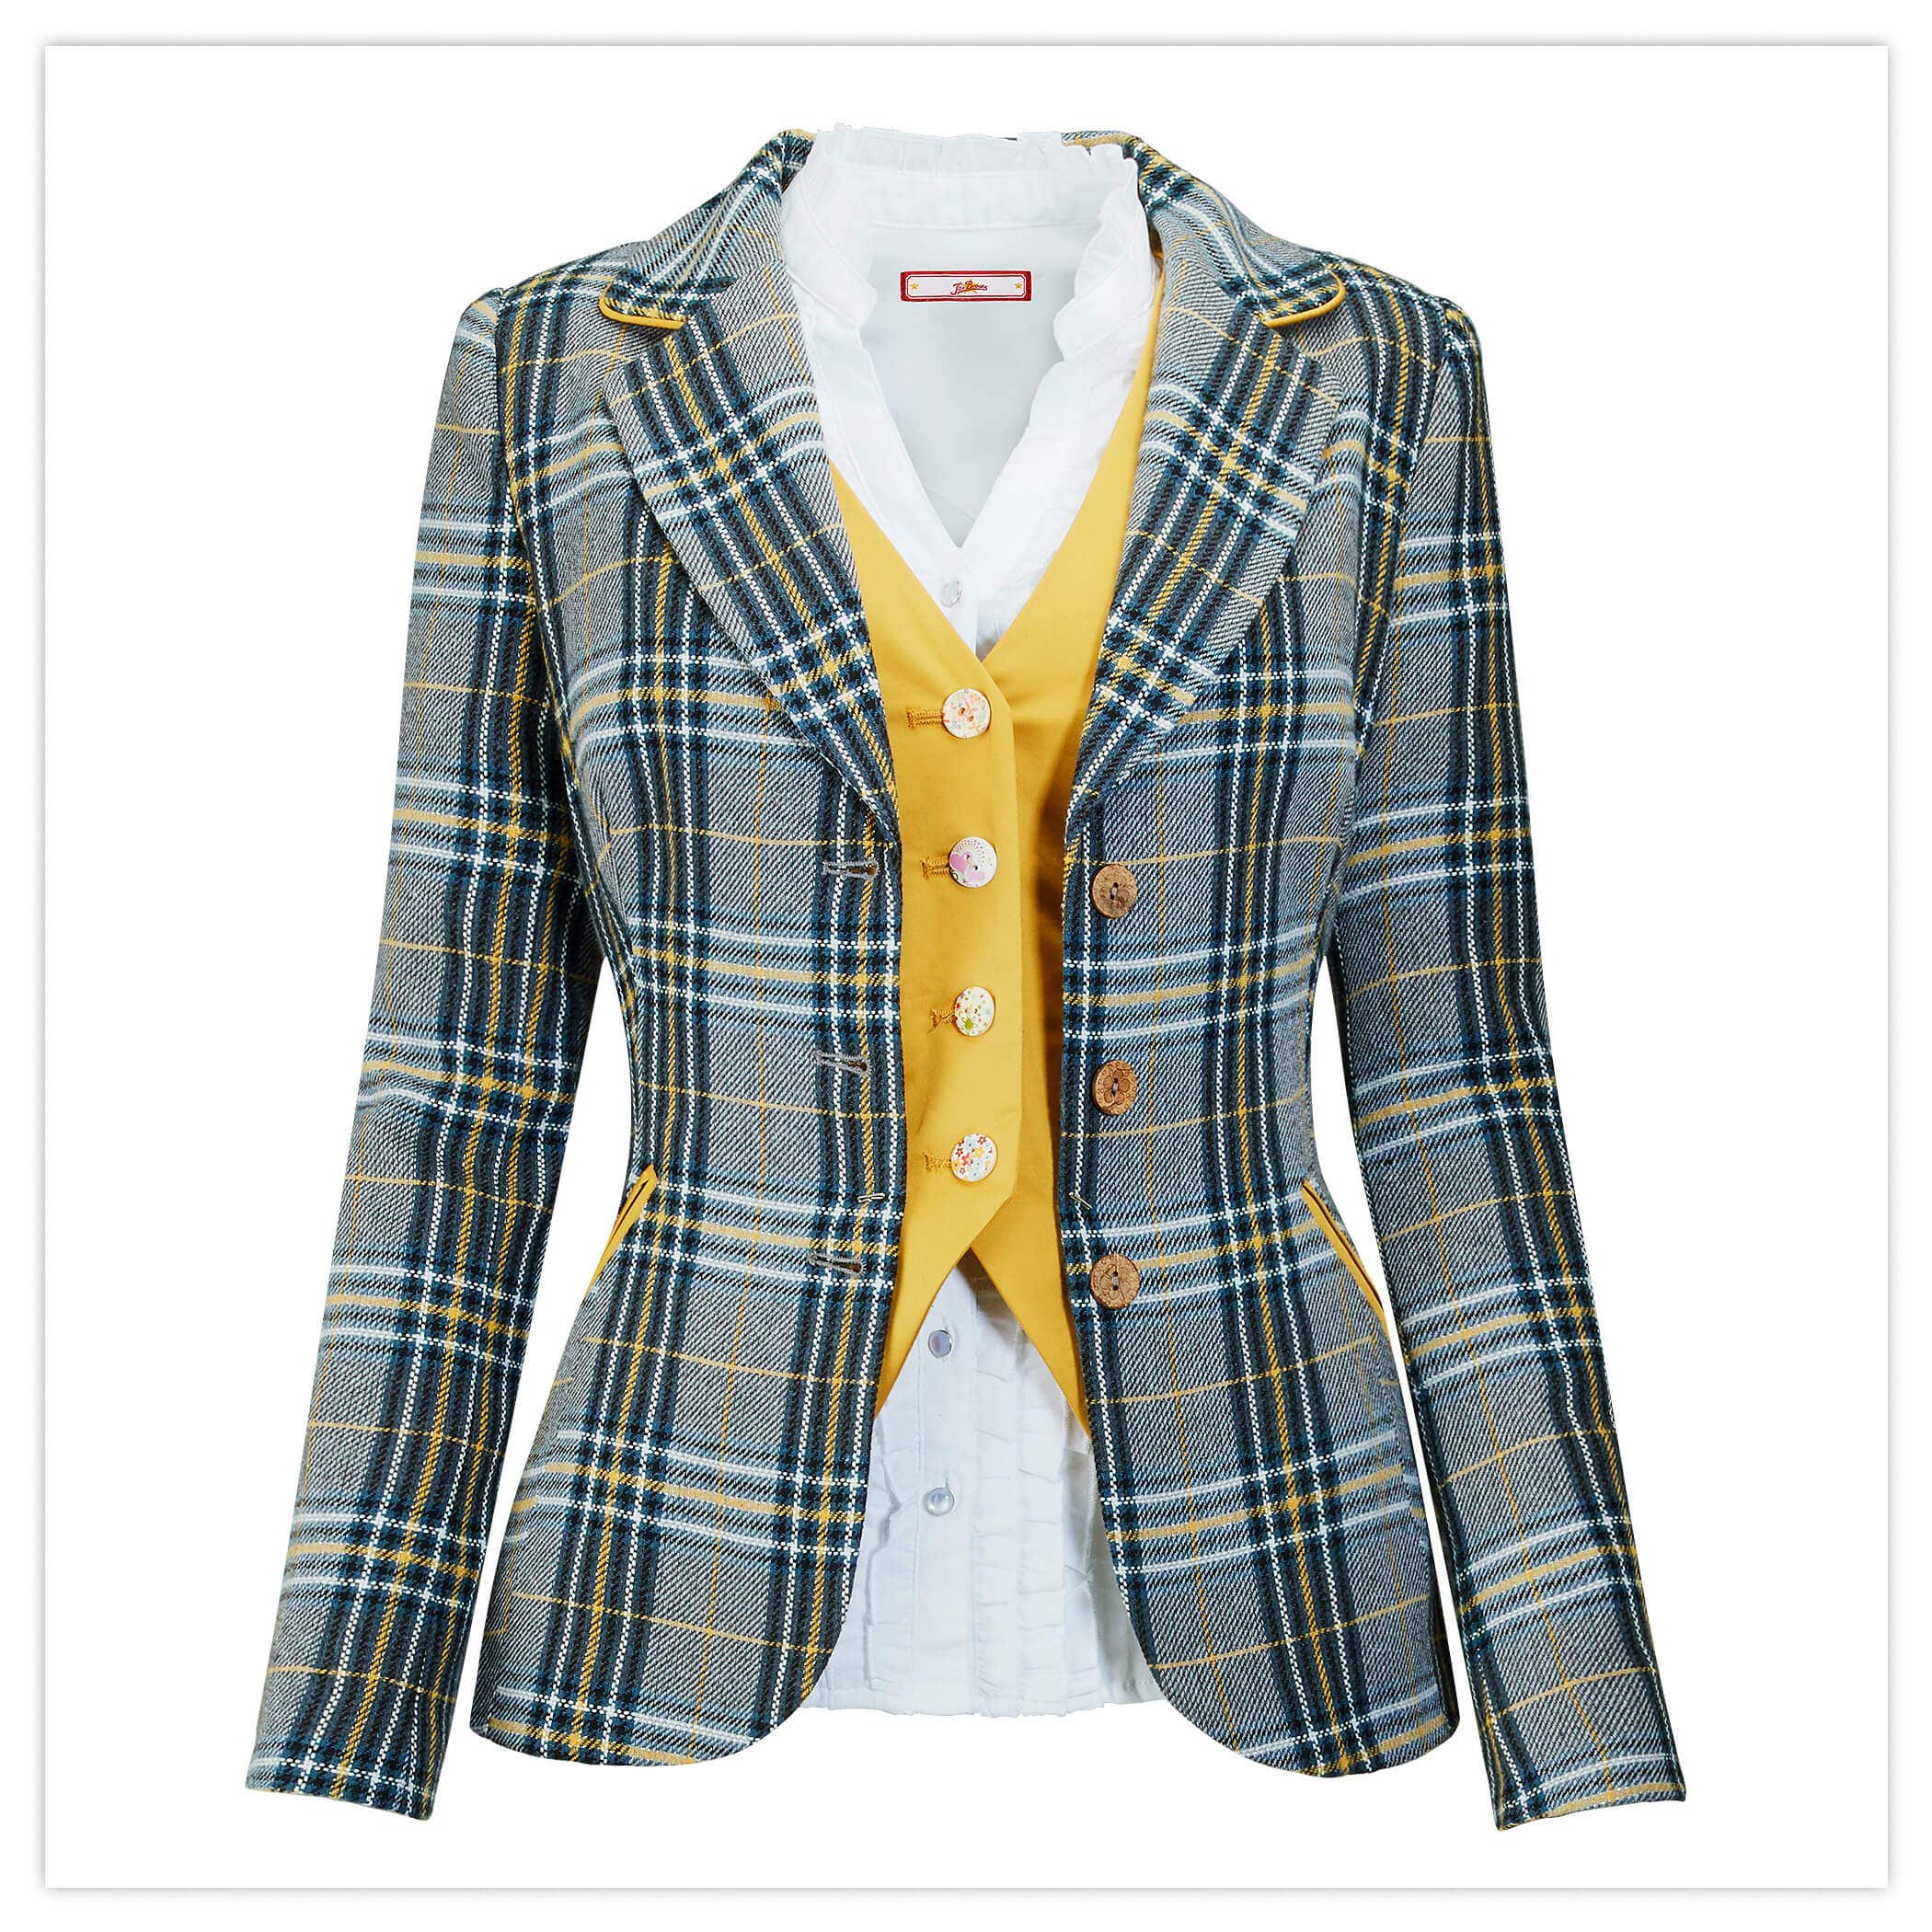 Quirky Check Jacket